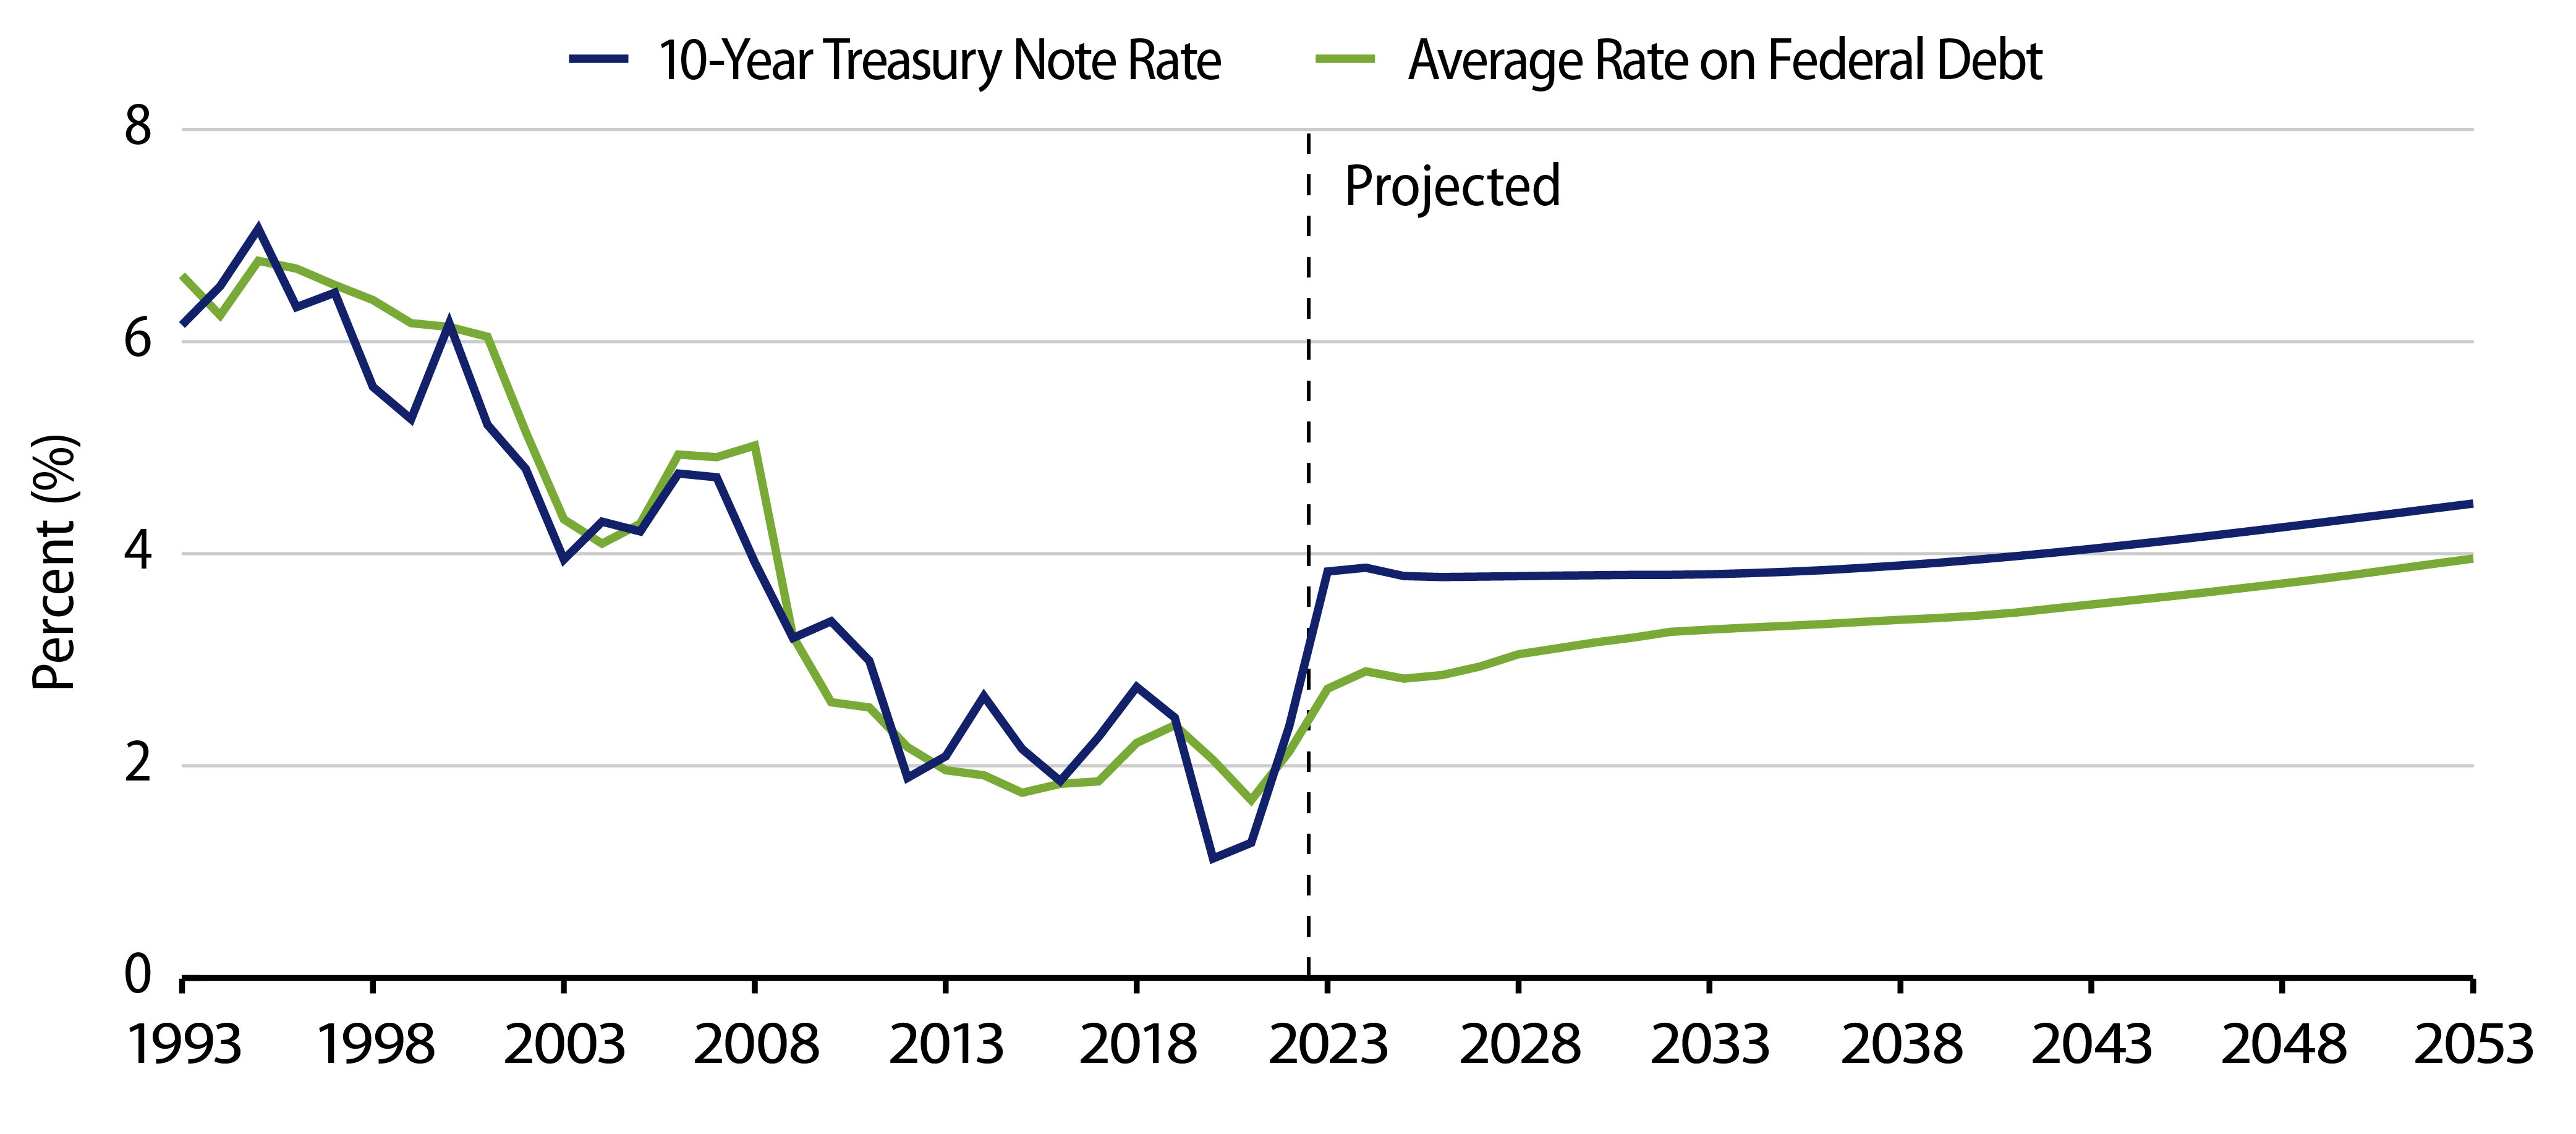 Explore Average Interest Rates on Federal Debt and on 10-Year Treasury Notes